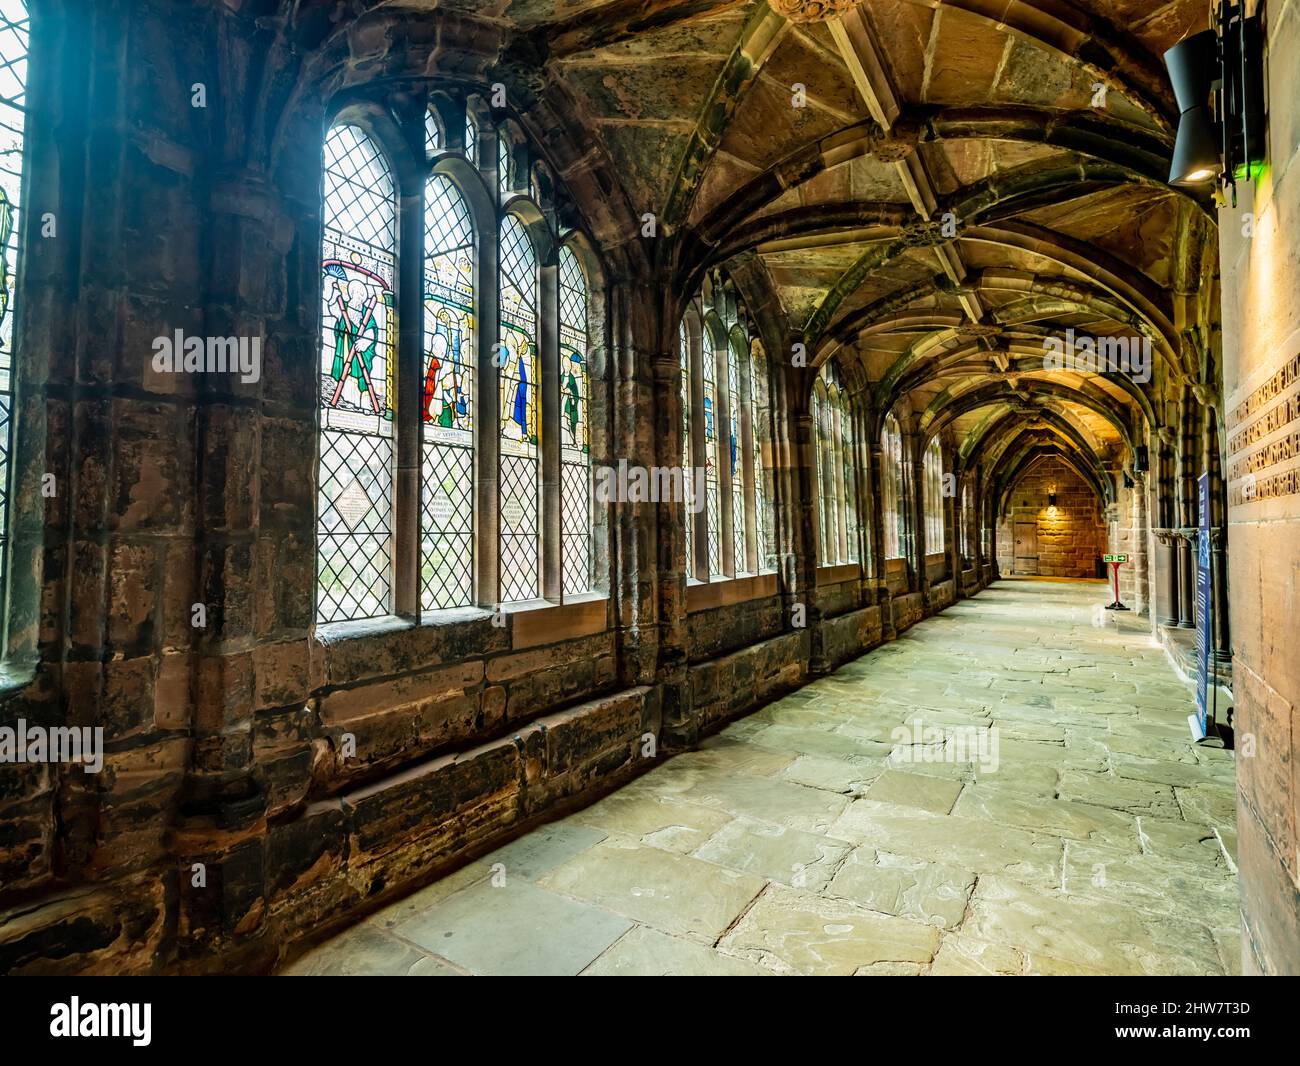 The Cloister within Chester Cathedral. Stock Photo